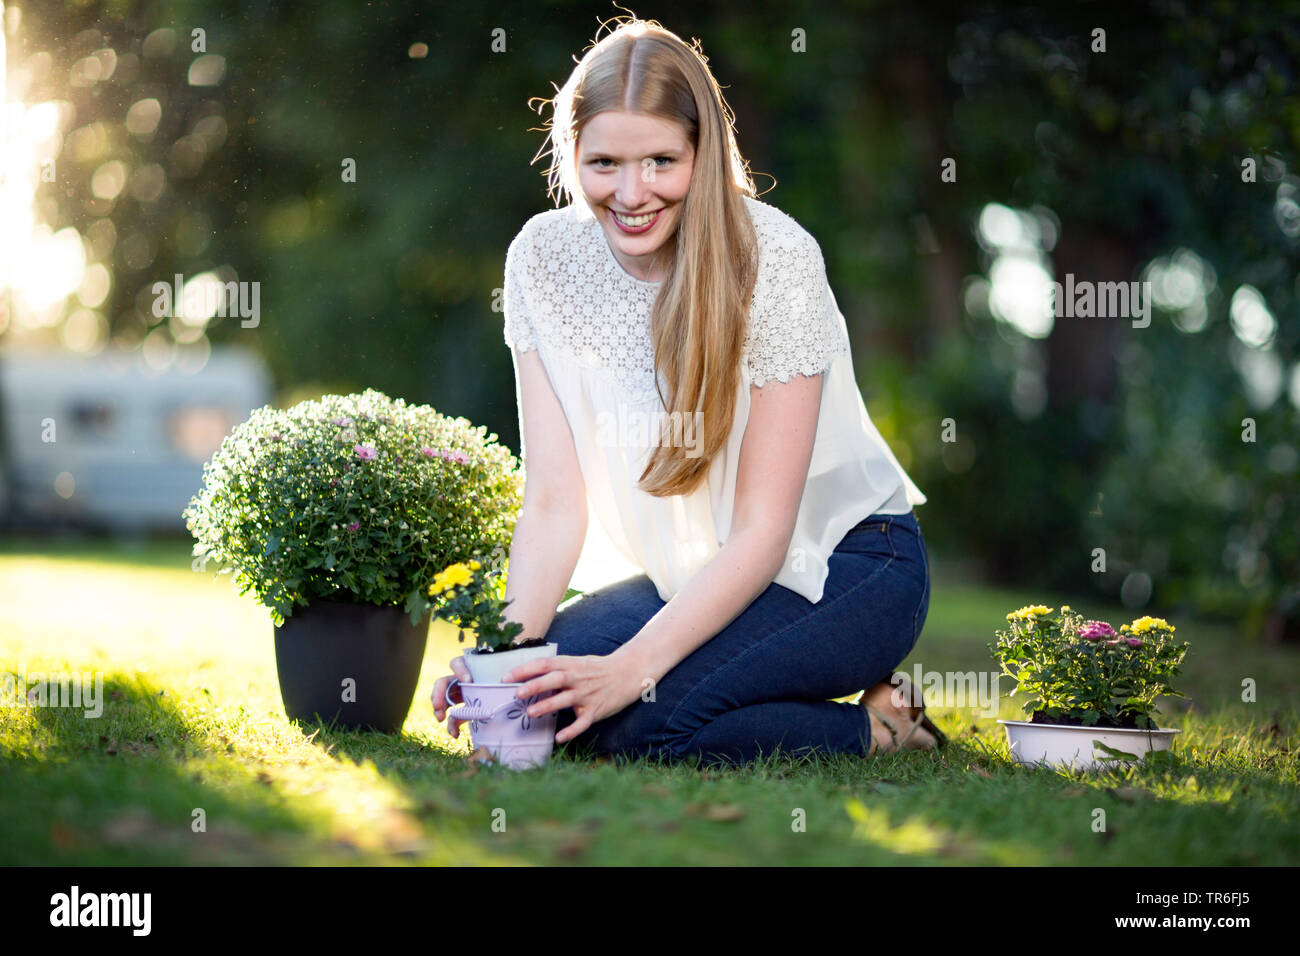 young blond woman sitting with asters on a lawn, Germany Stock Photo